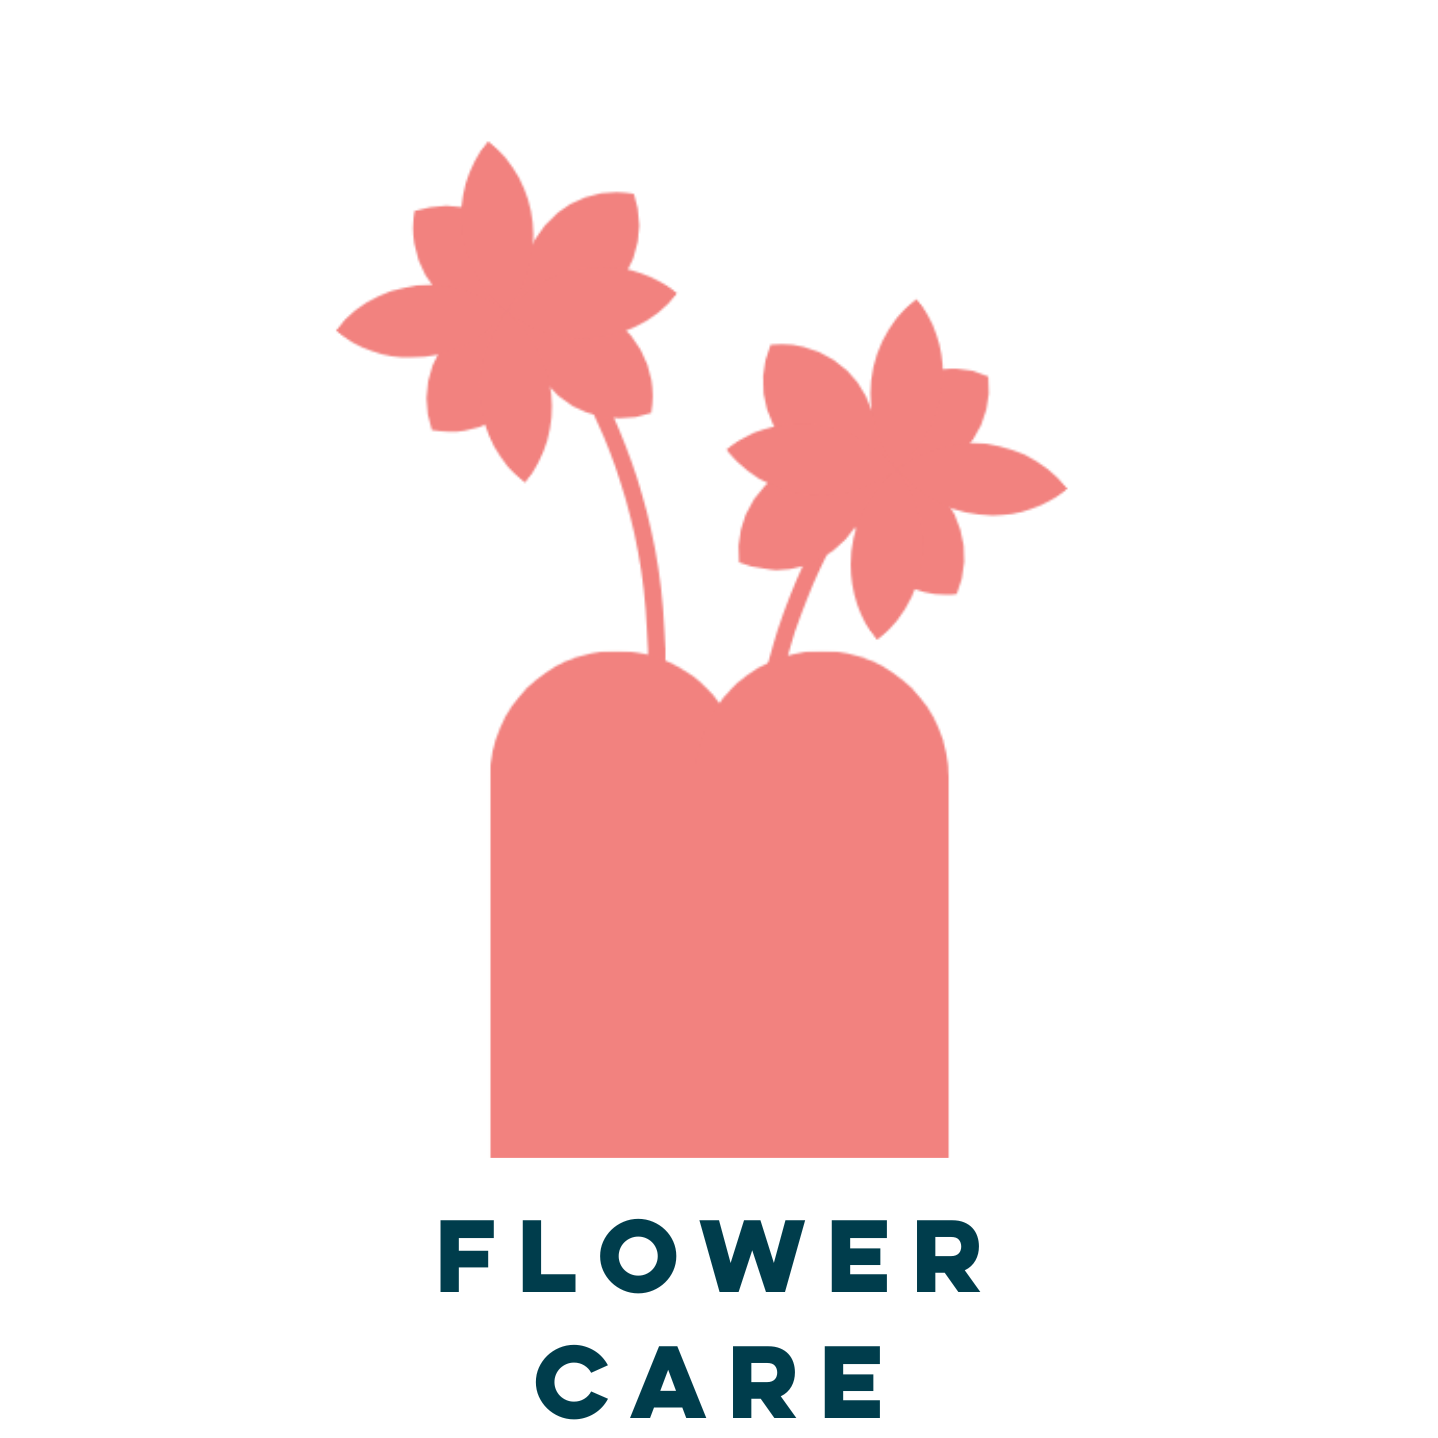 Flower care icon with words .png__PID:bd27f649-6b40-4a56-92d6-cf57b6d81000